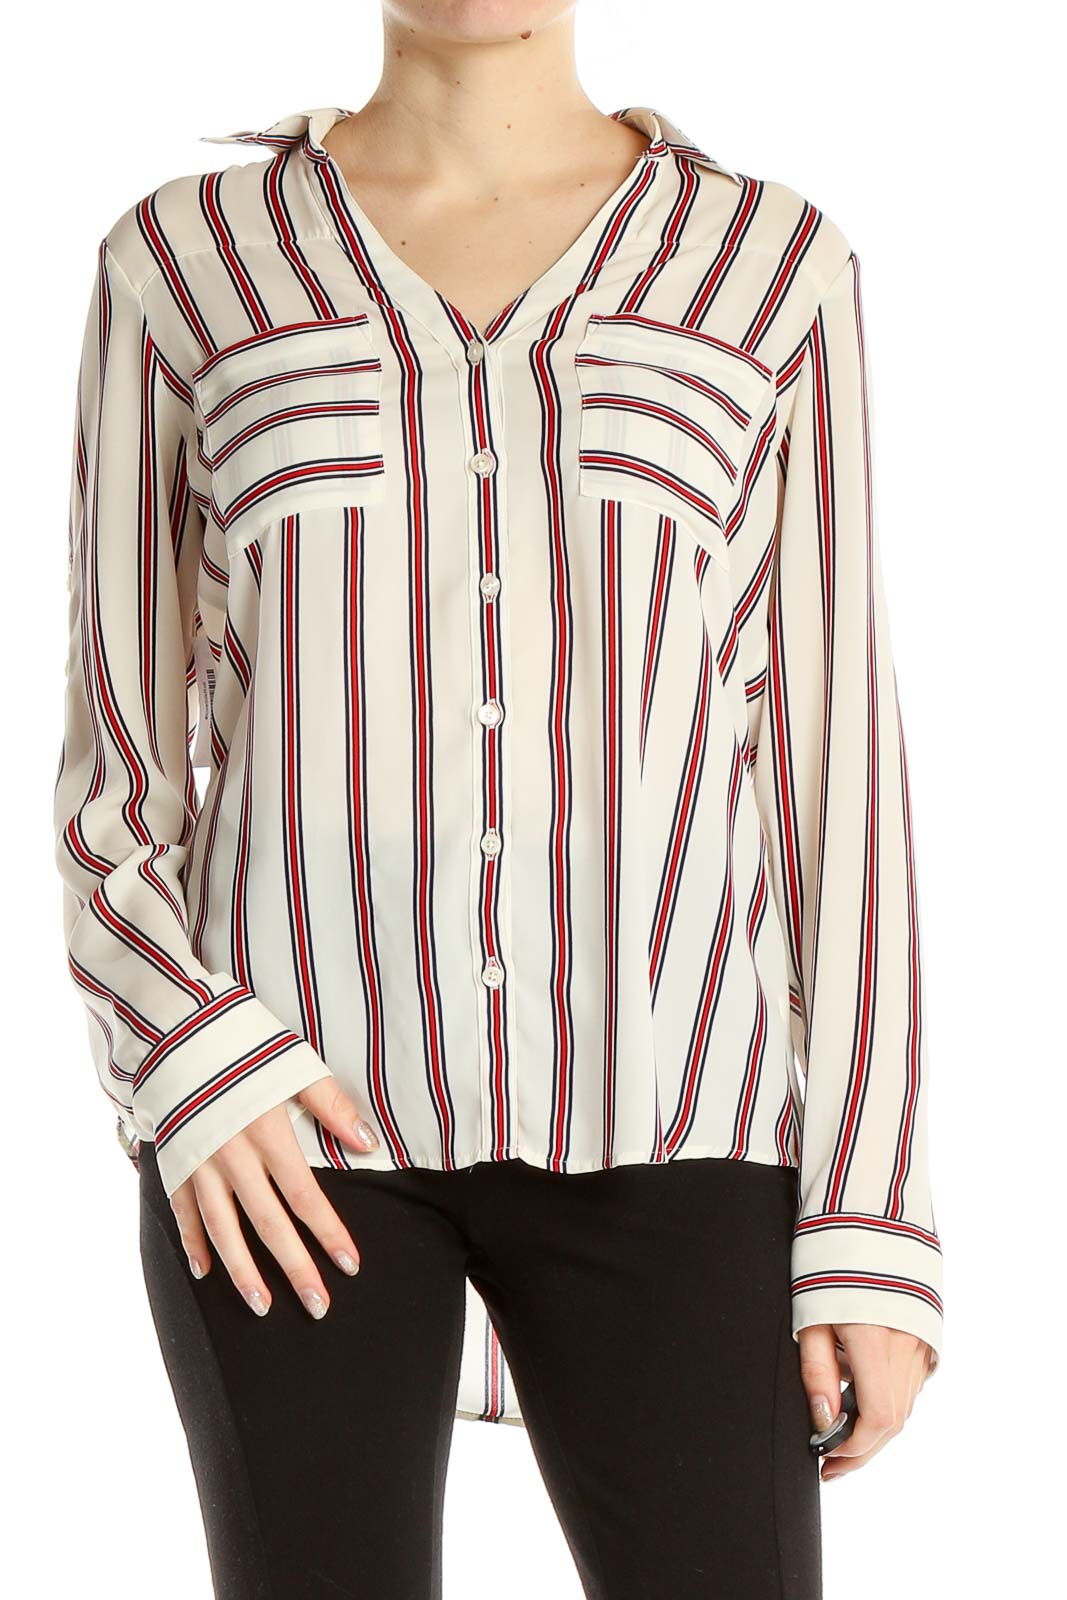 White Red Striped Formal Top Front